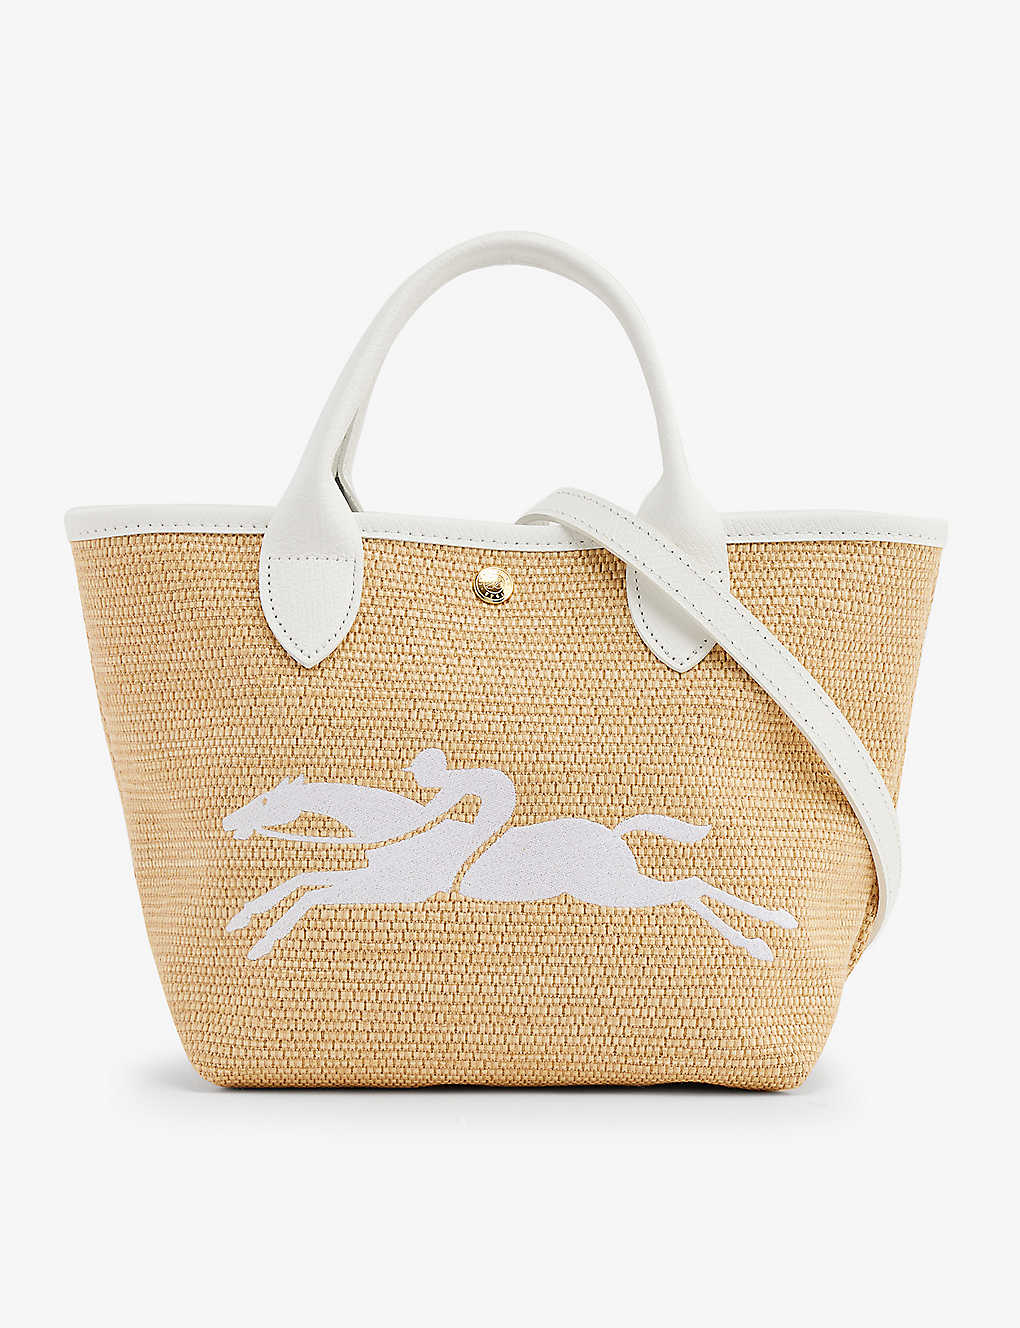 Switch to Sustainable Fashion with a Straw Tote Bag